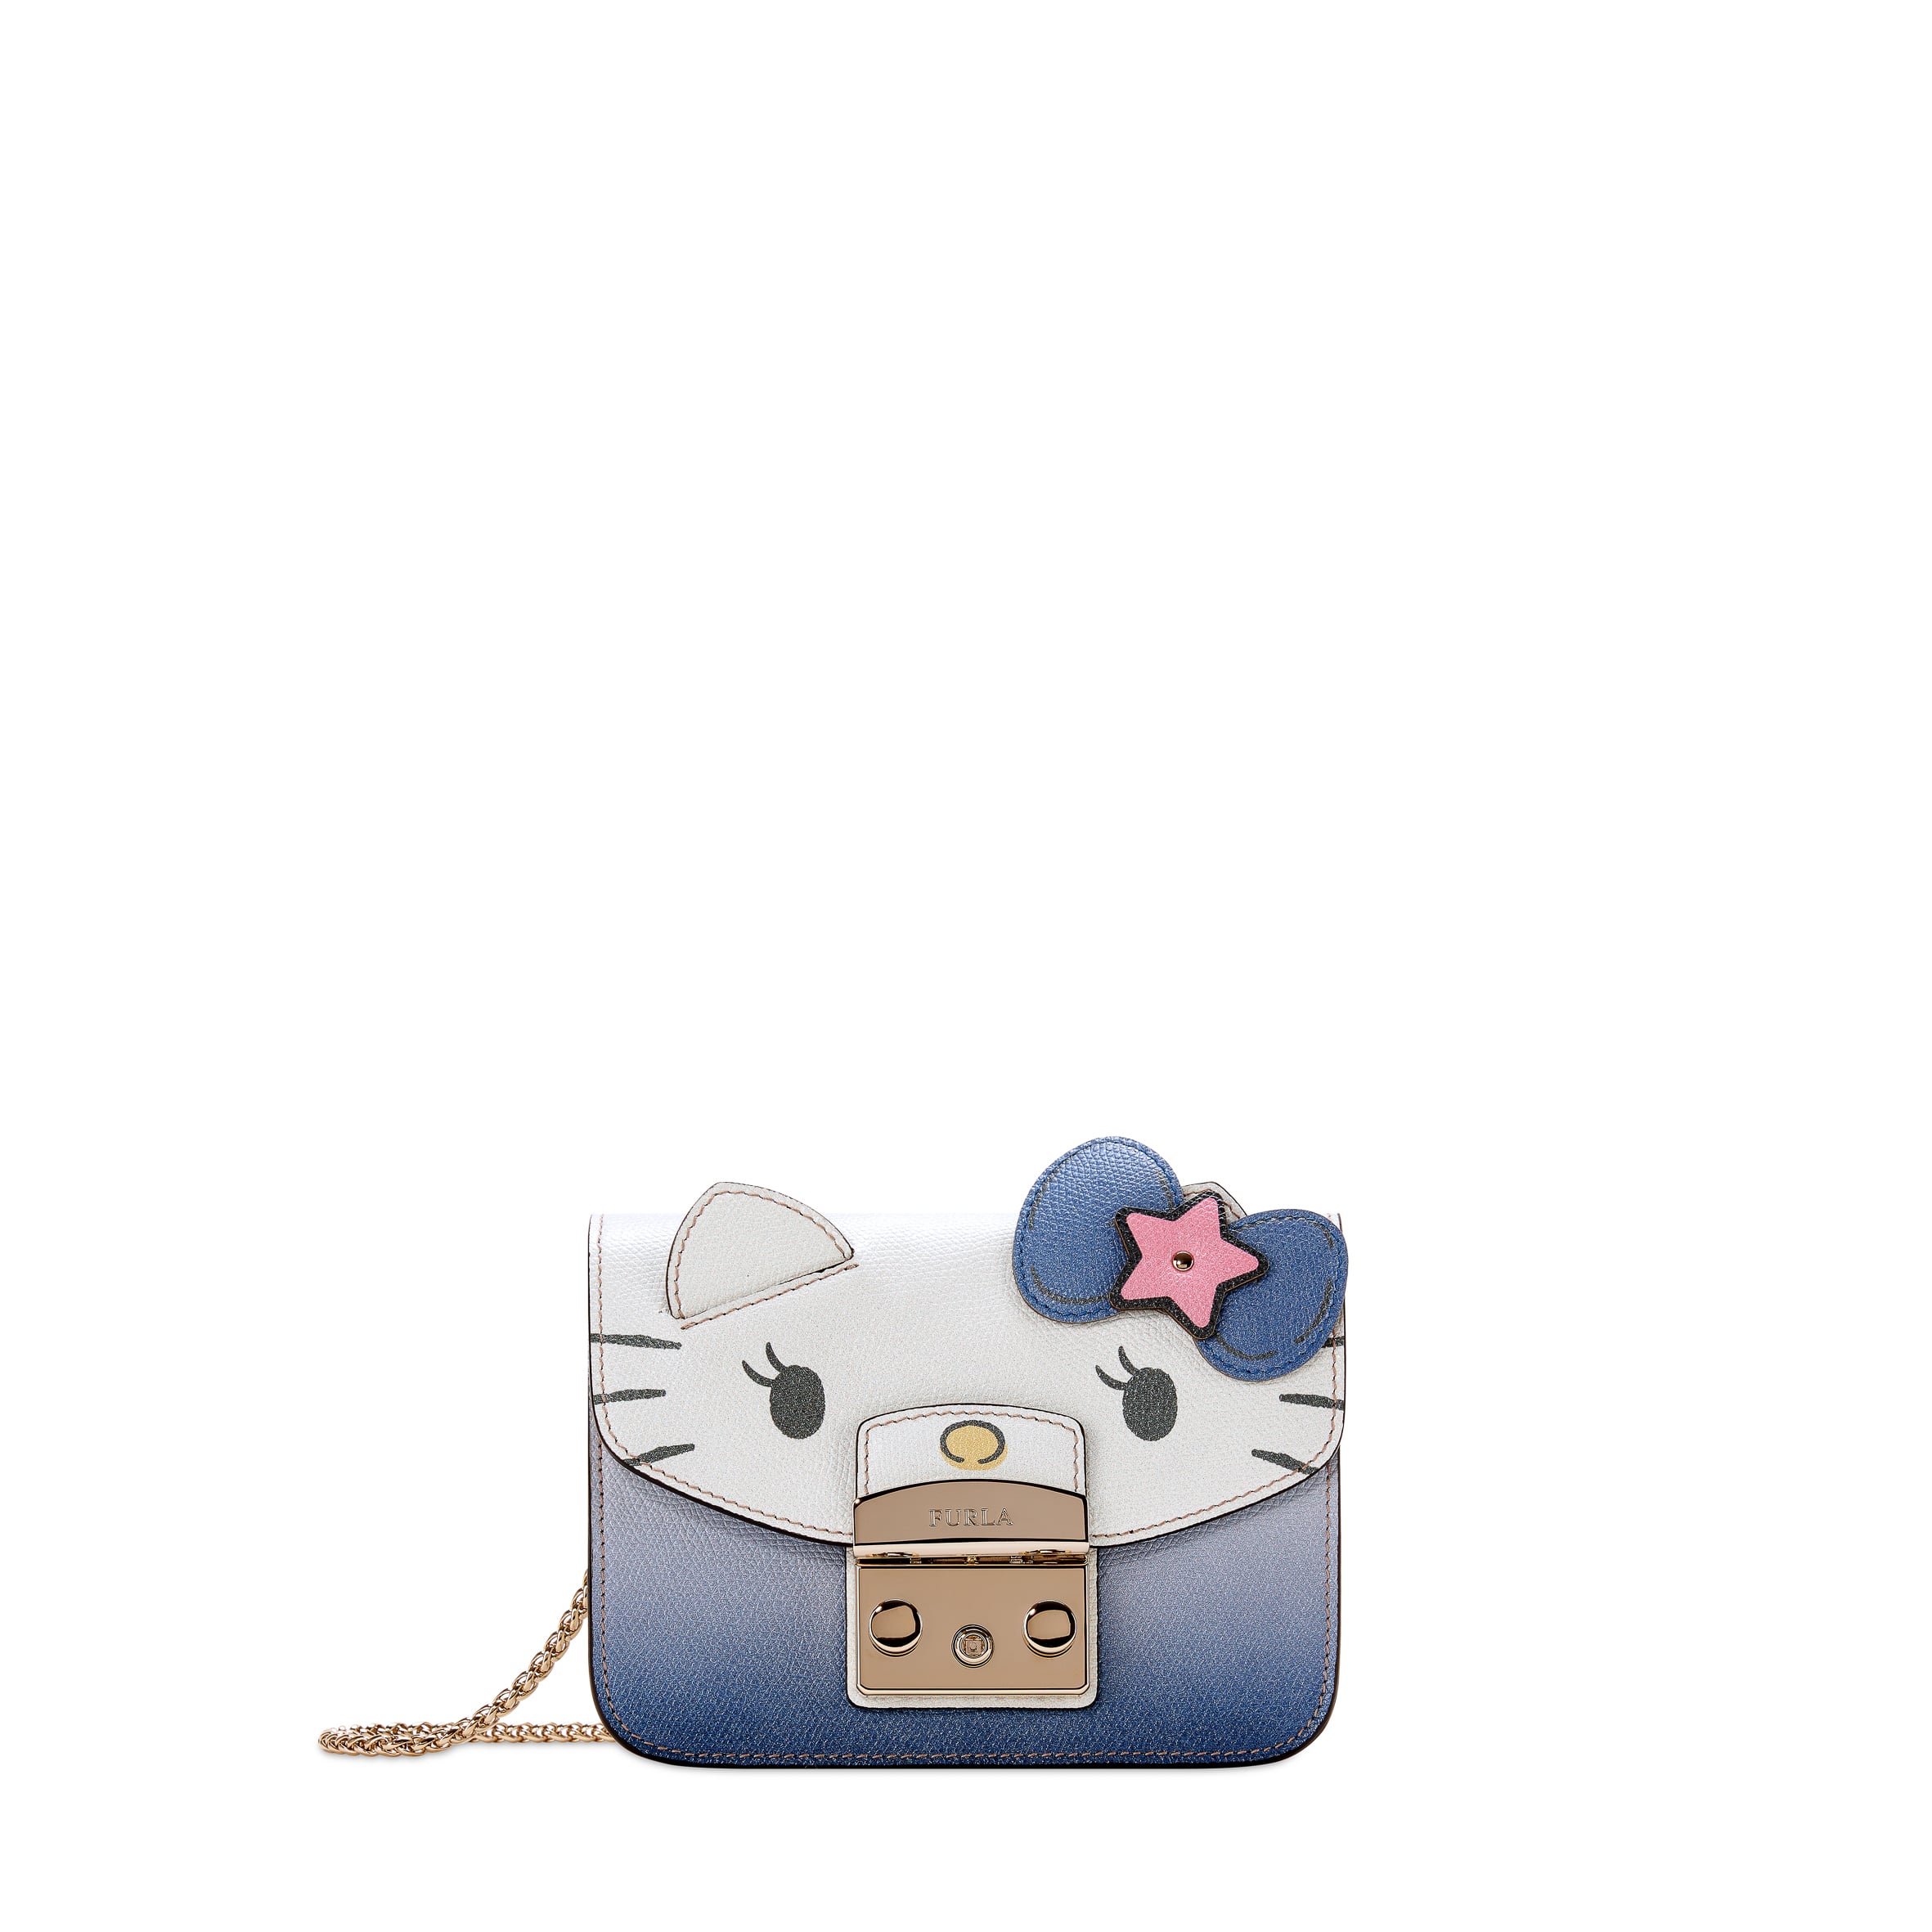 Hello Kitty Products for Obsessive Fans-Hello Kitty Bags by Furla